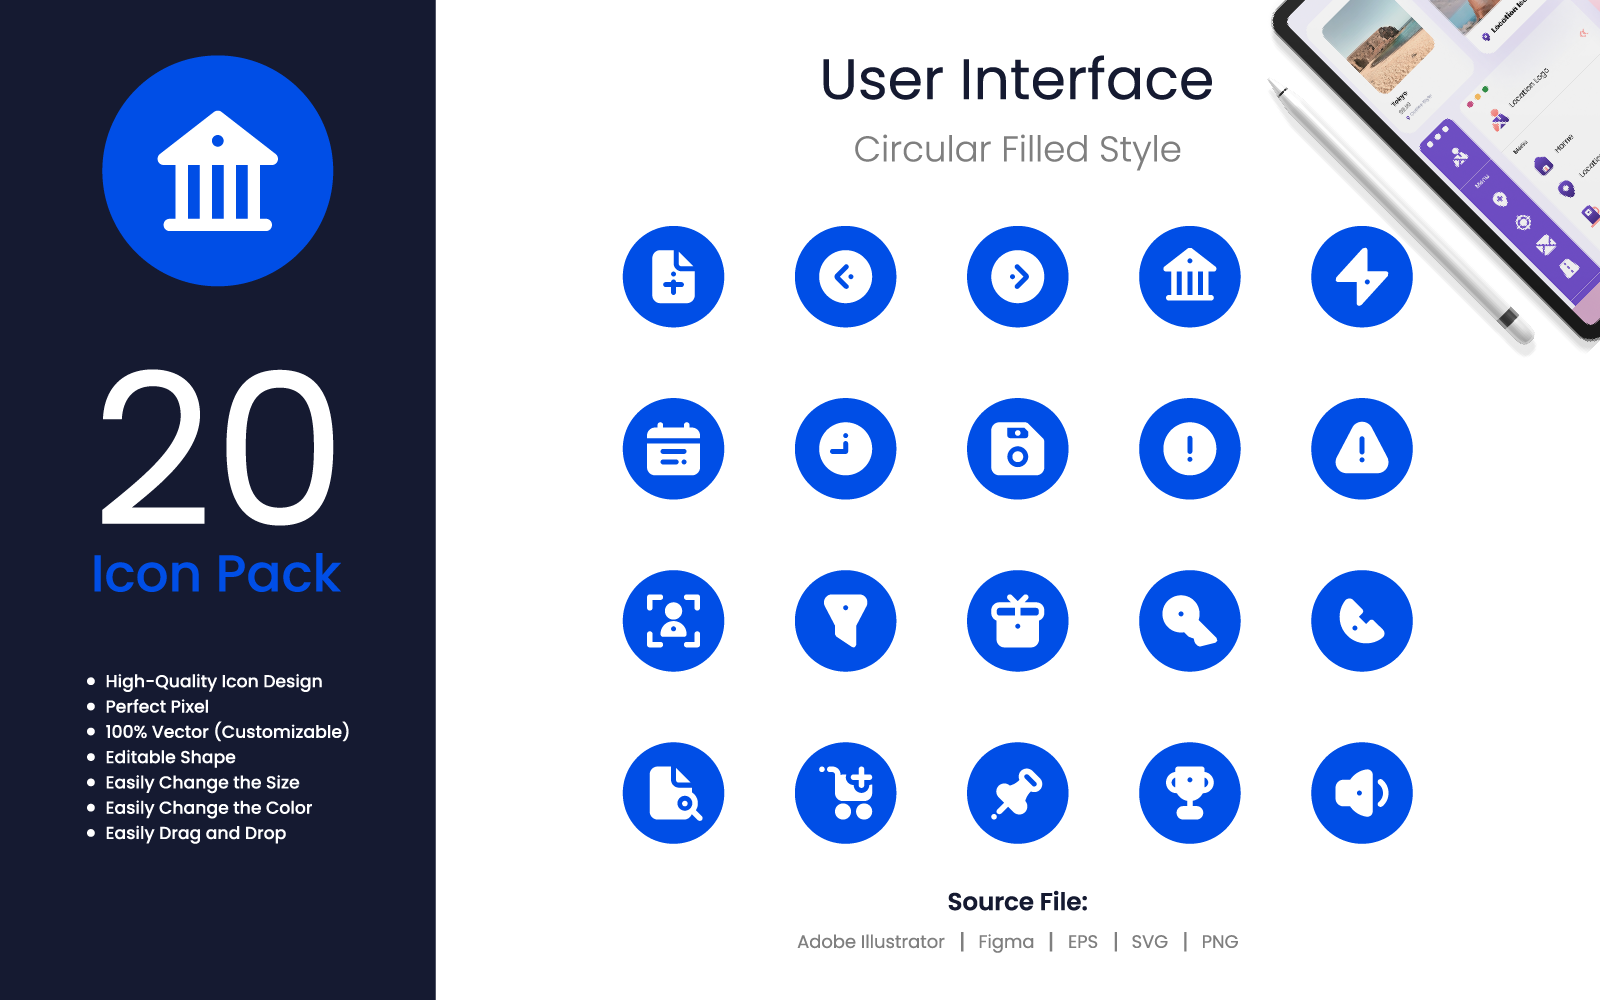 User Interface Icon Pack Circular Filled Style